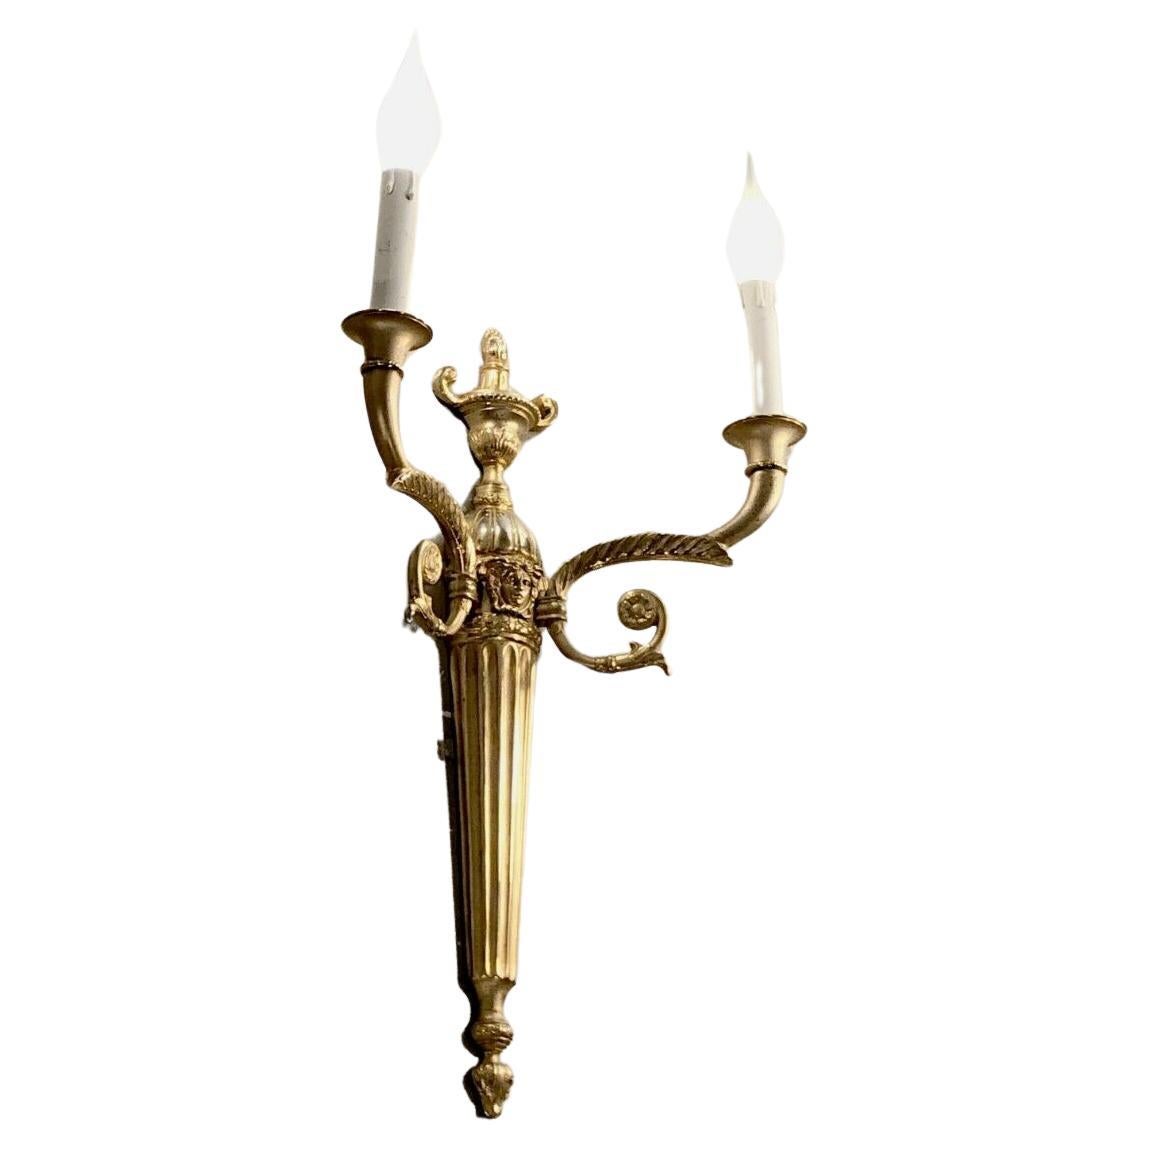 A NEO-CLASSICAL SHABBY-CHIC Bronze WALL APPLIQUE by GIANNI VERSACE, Italy 1990 For Sale